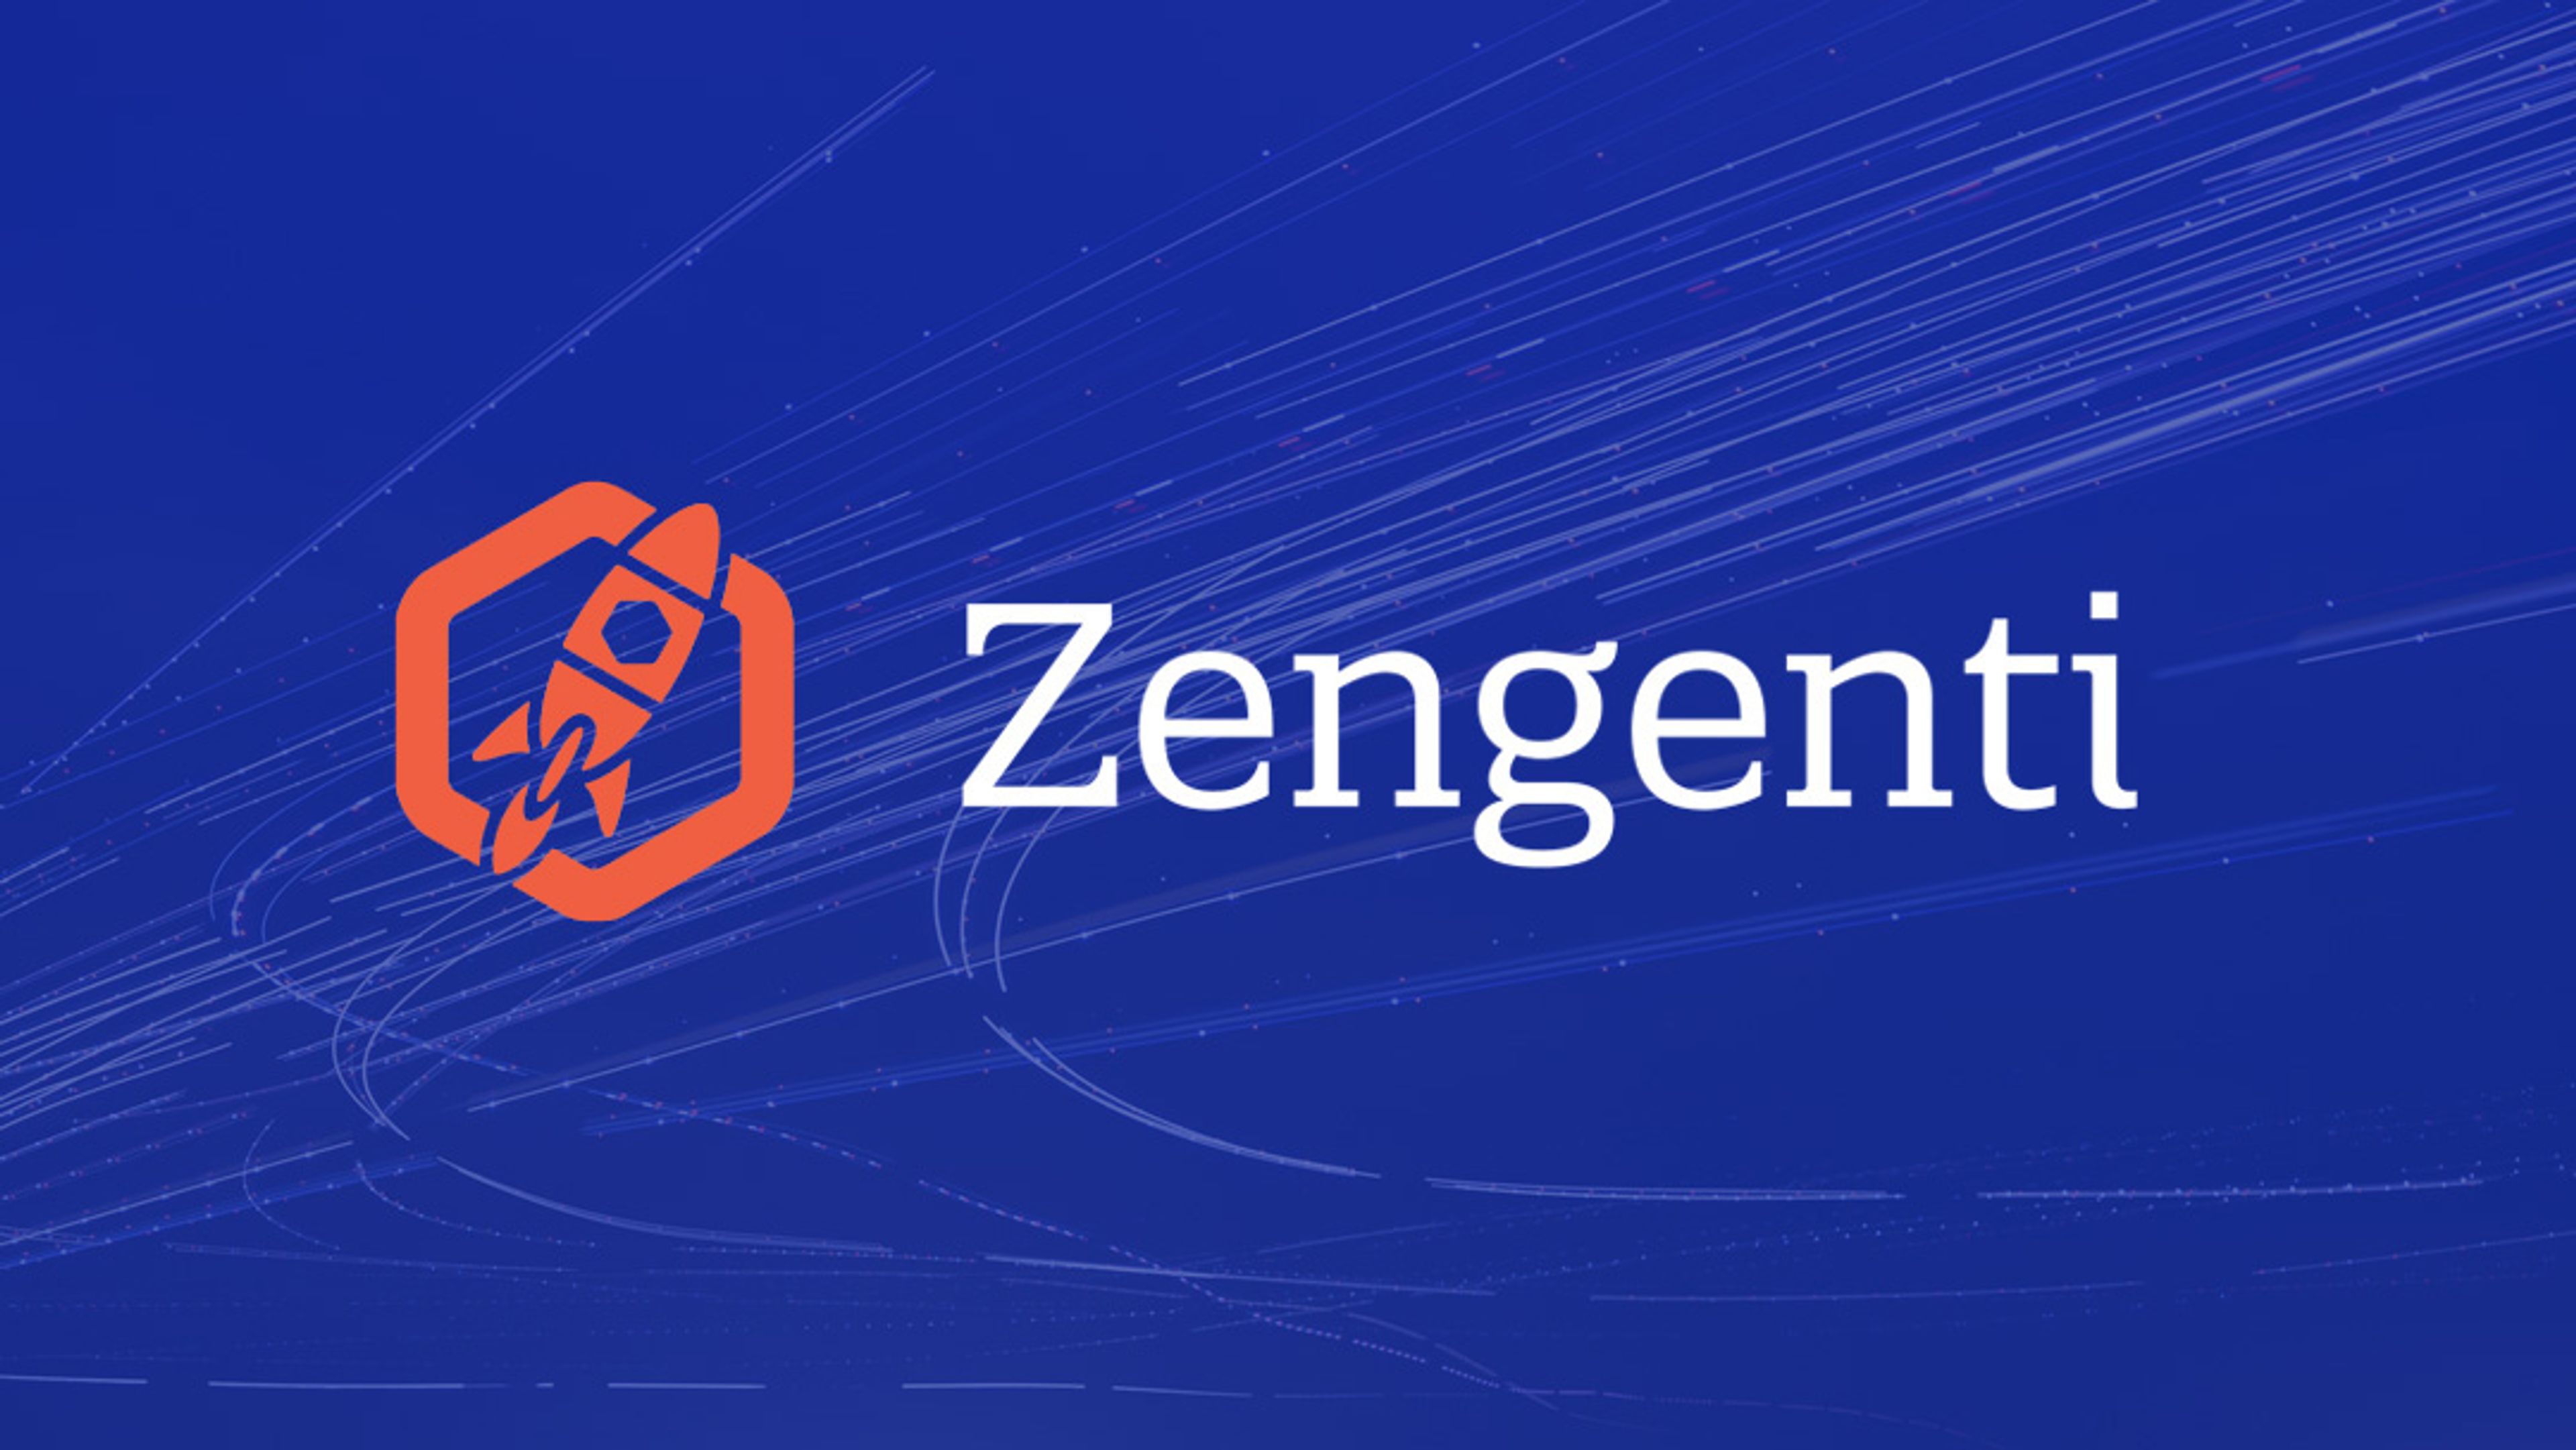 Zengenti logo against a background with contrails from jets